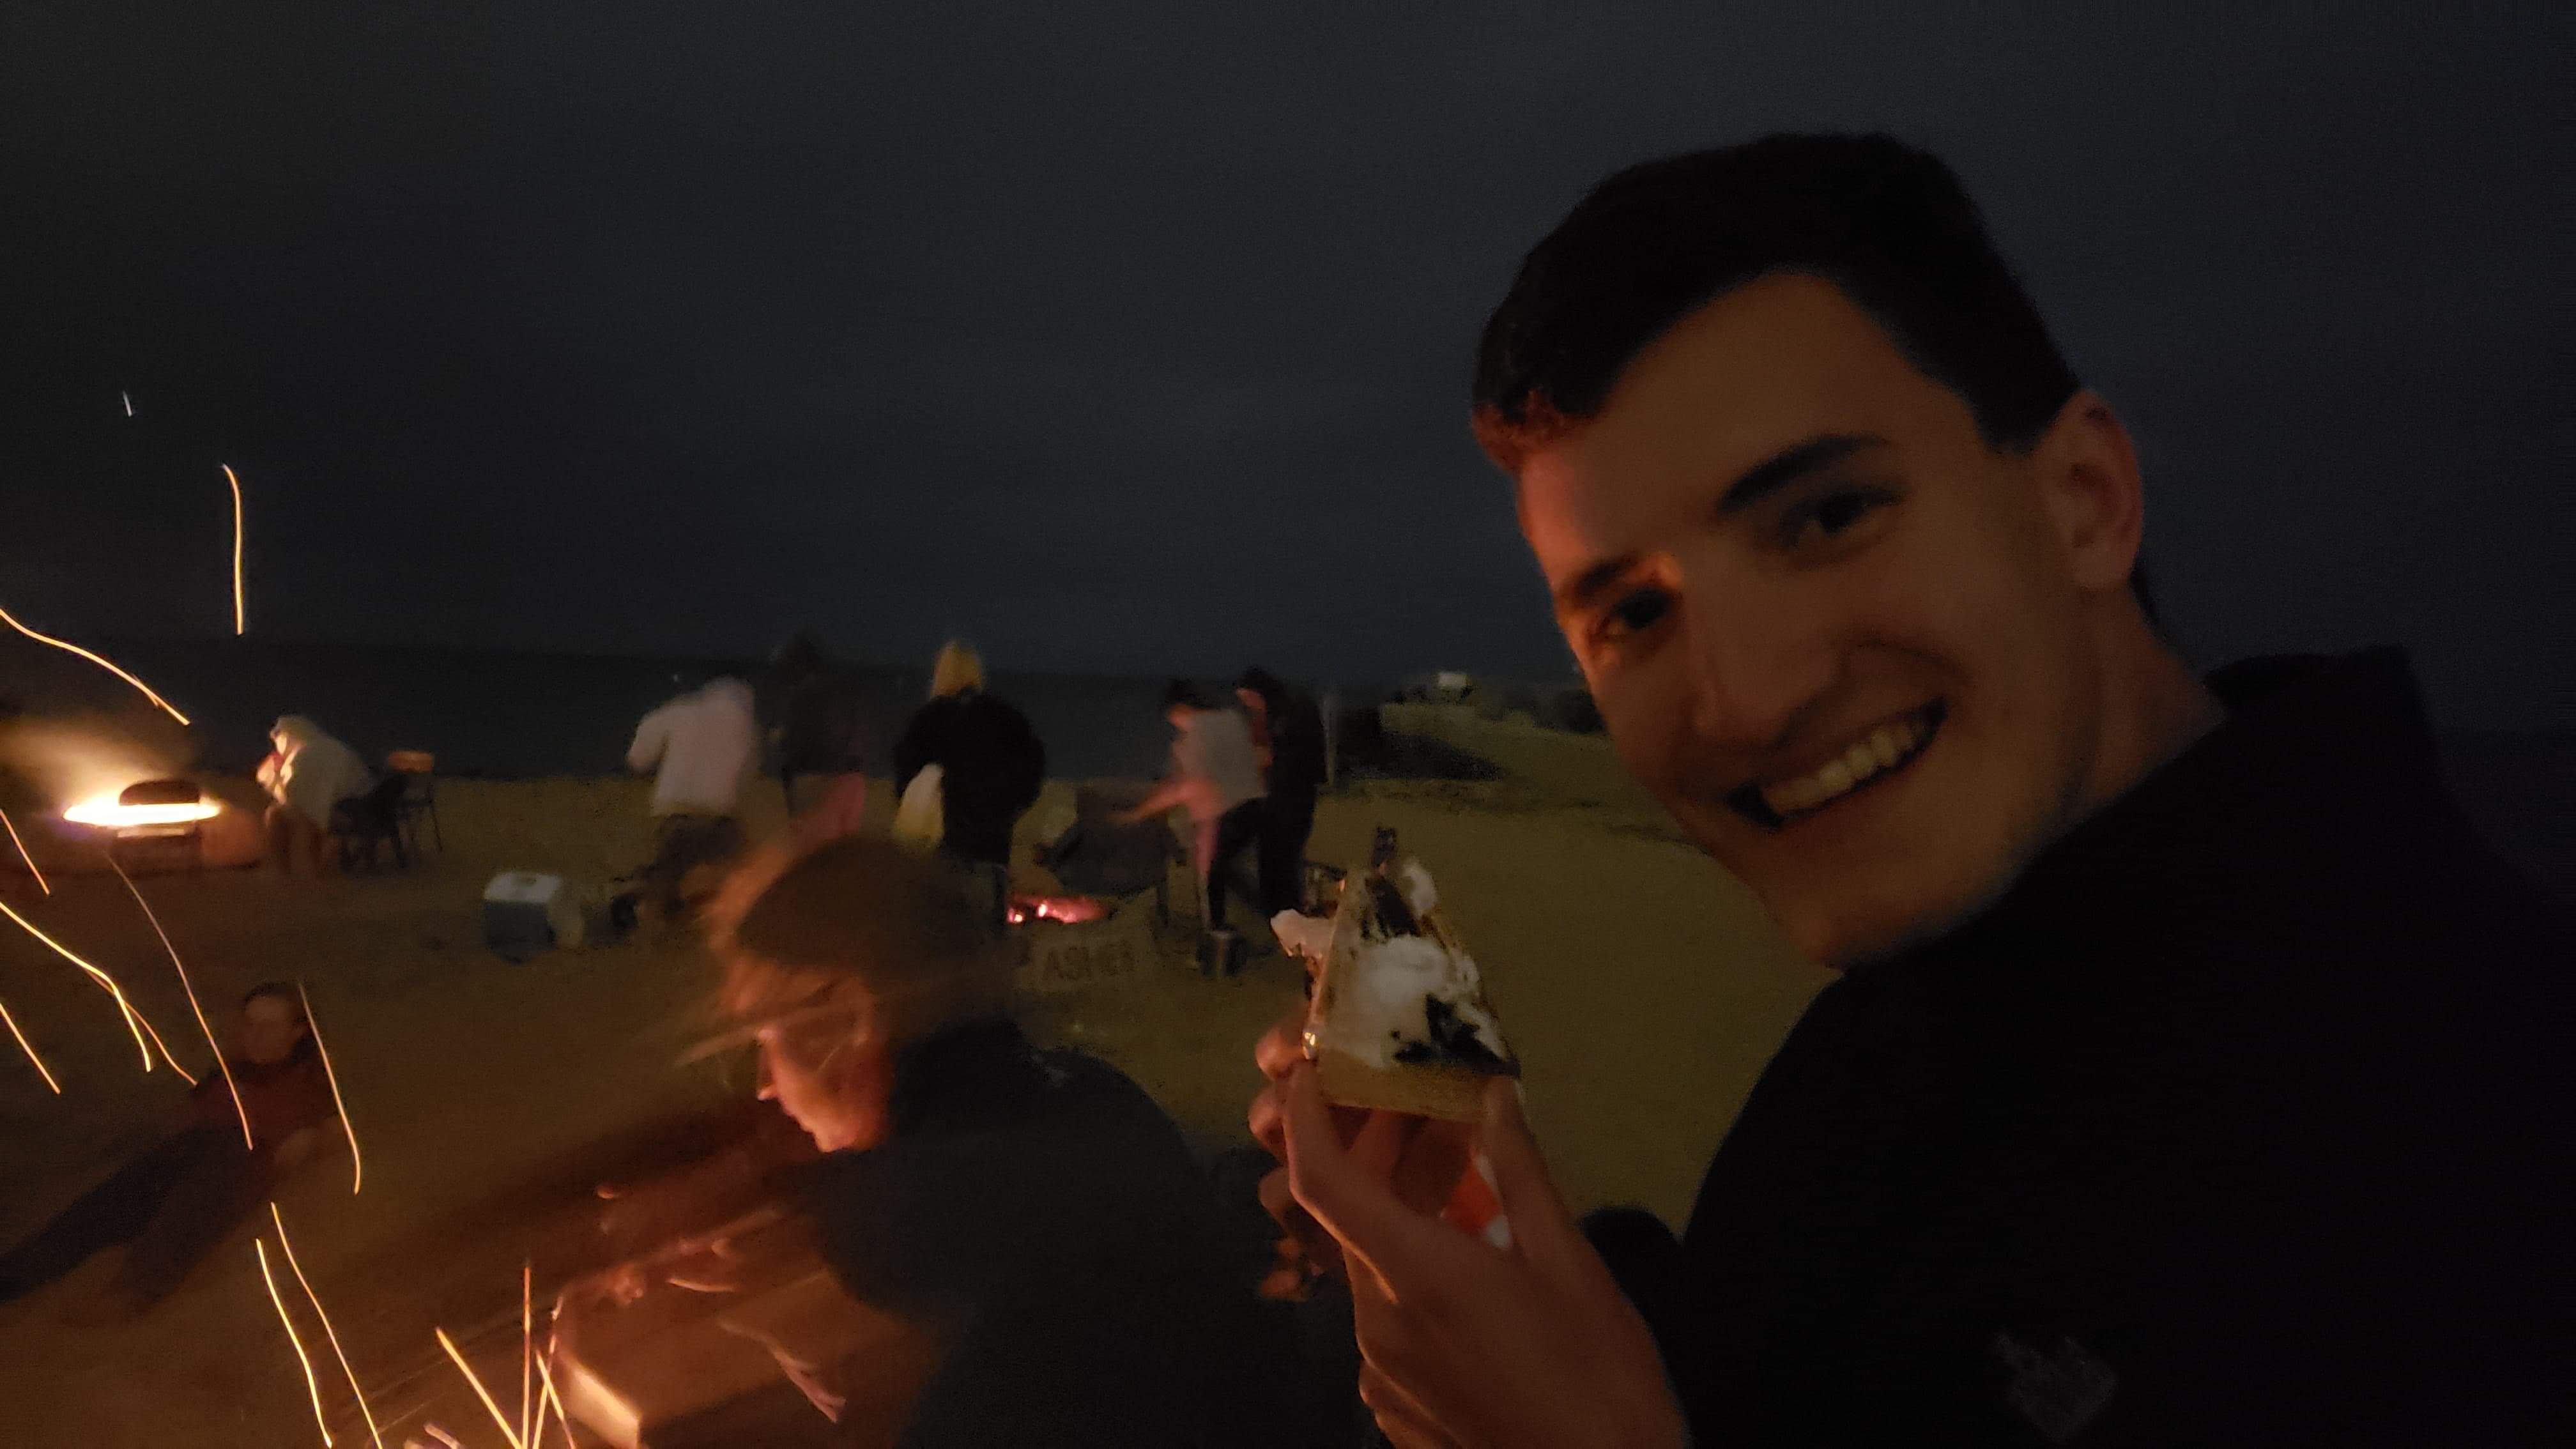 A happy Jack (before grad school) holds a s'more-like object on the beach at night.